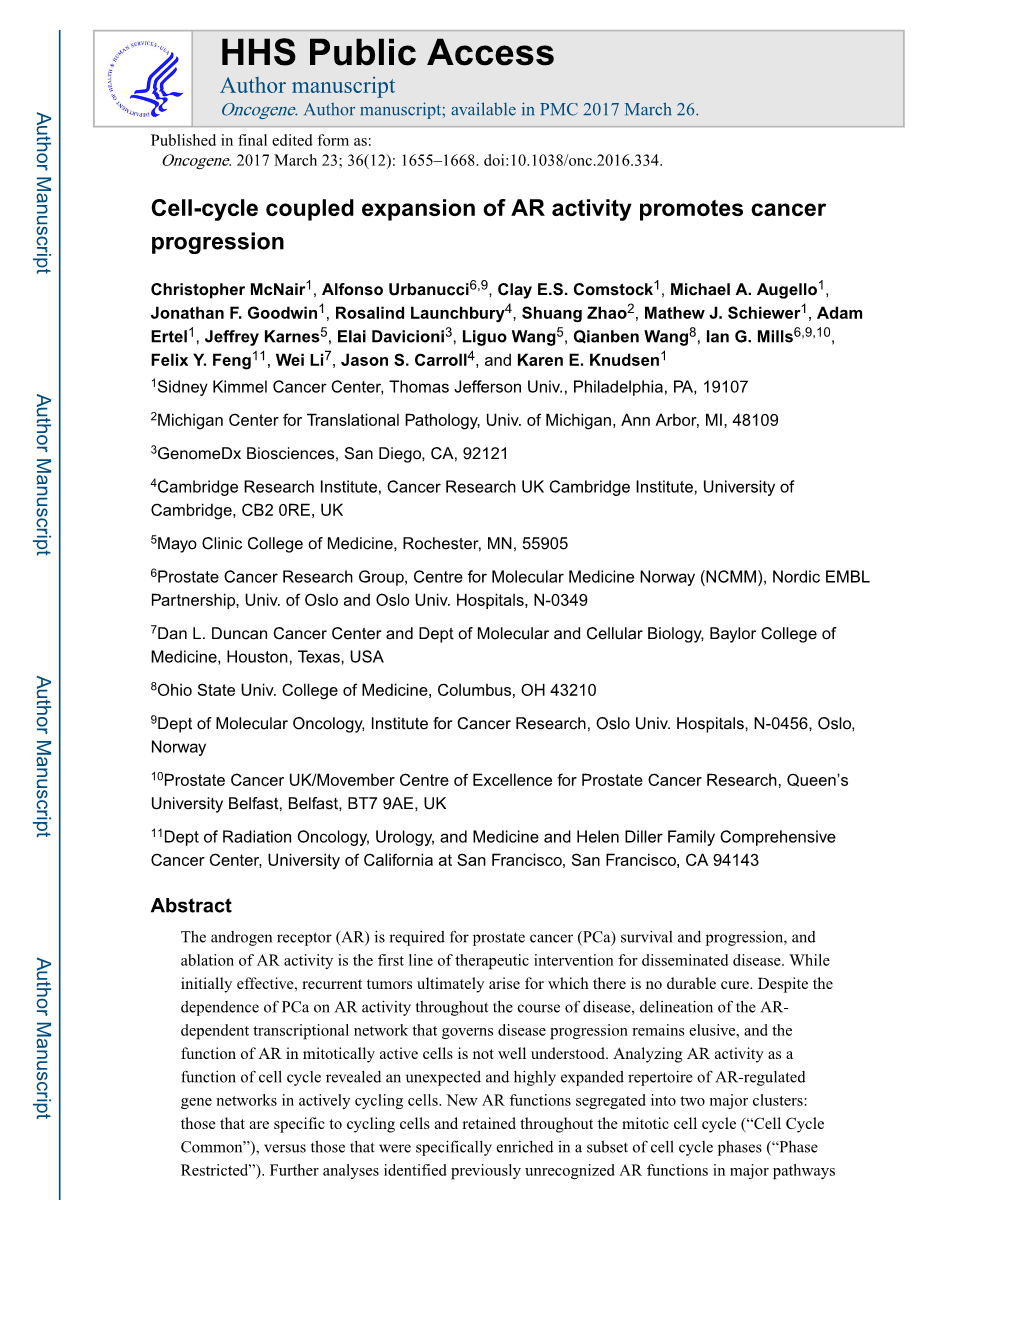 Cell-Cycle Coupled Expansion of AR Activity Promotes Cancer Progression